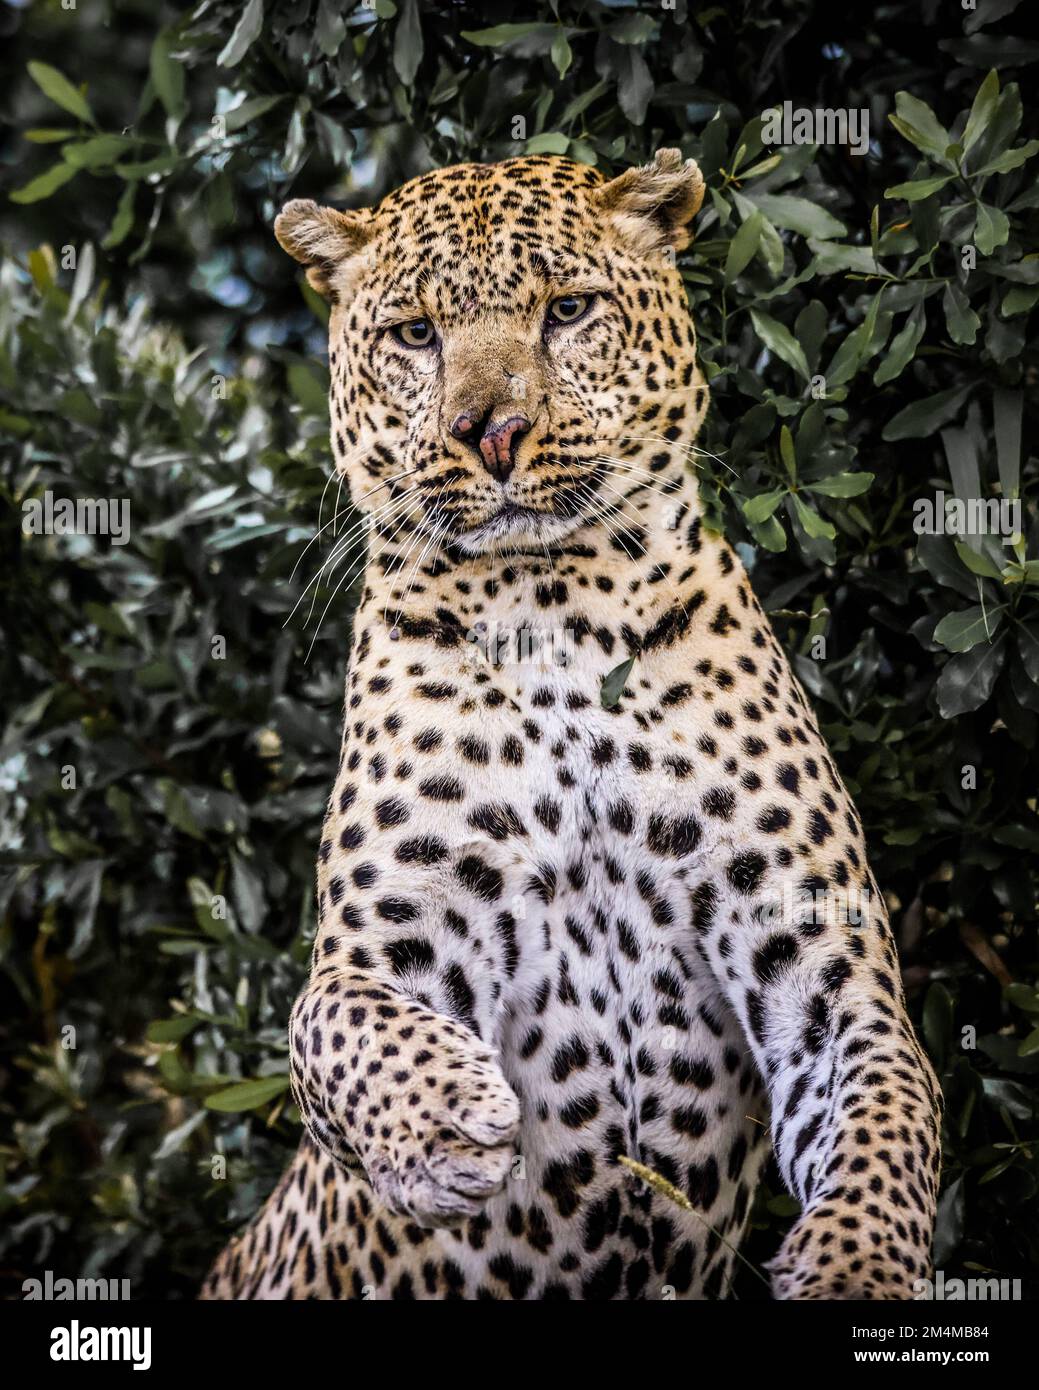 A shocked face. Kenya: THESE HILARIOUS images show a different side to African big cats, highlighting their goofy nature as they pull faces to one luc Stock Photo